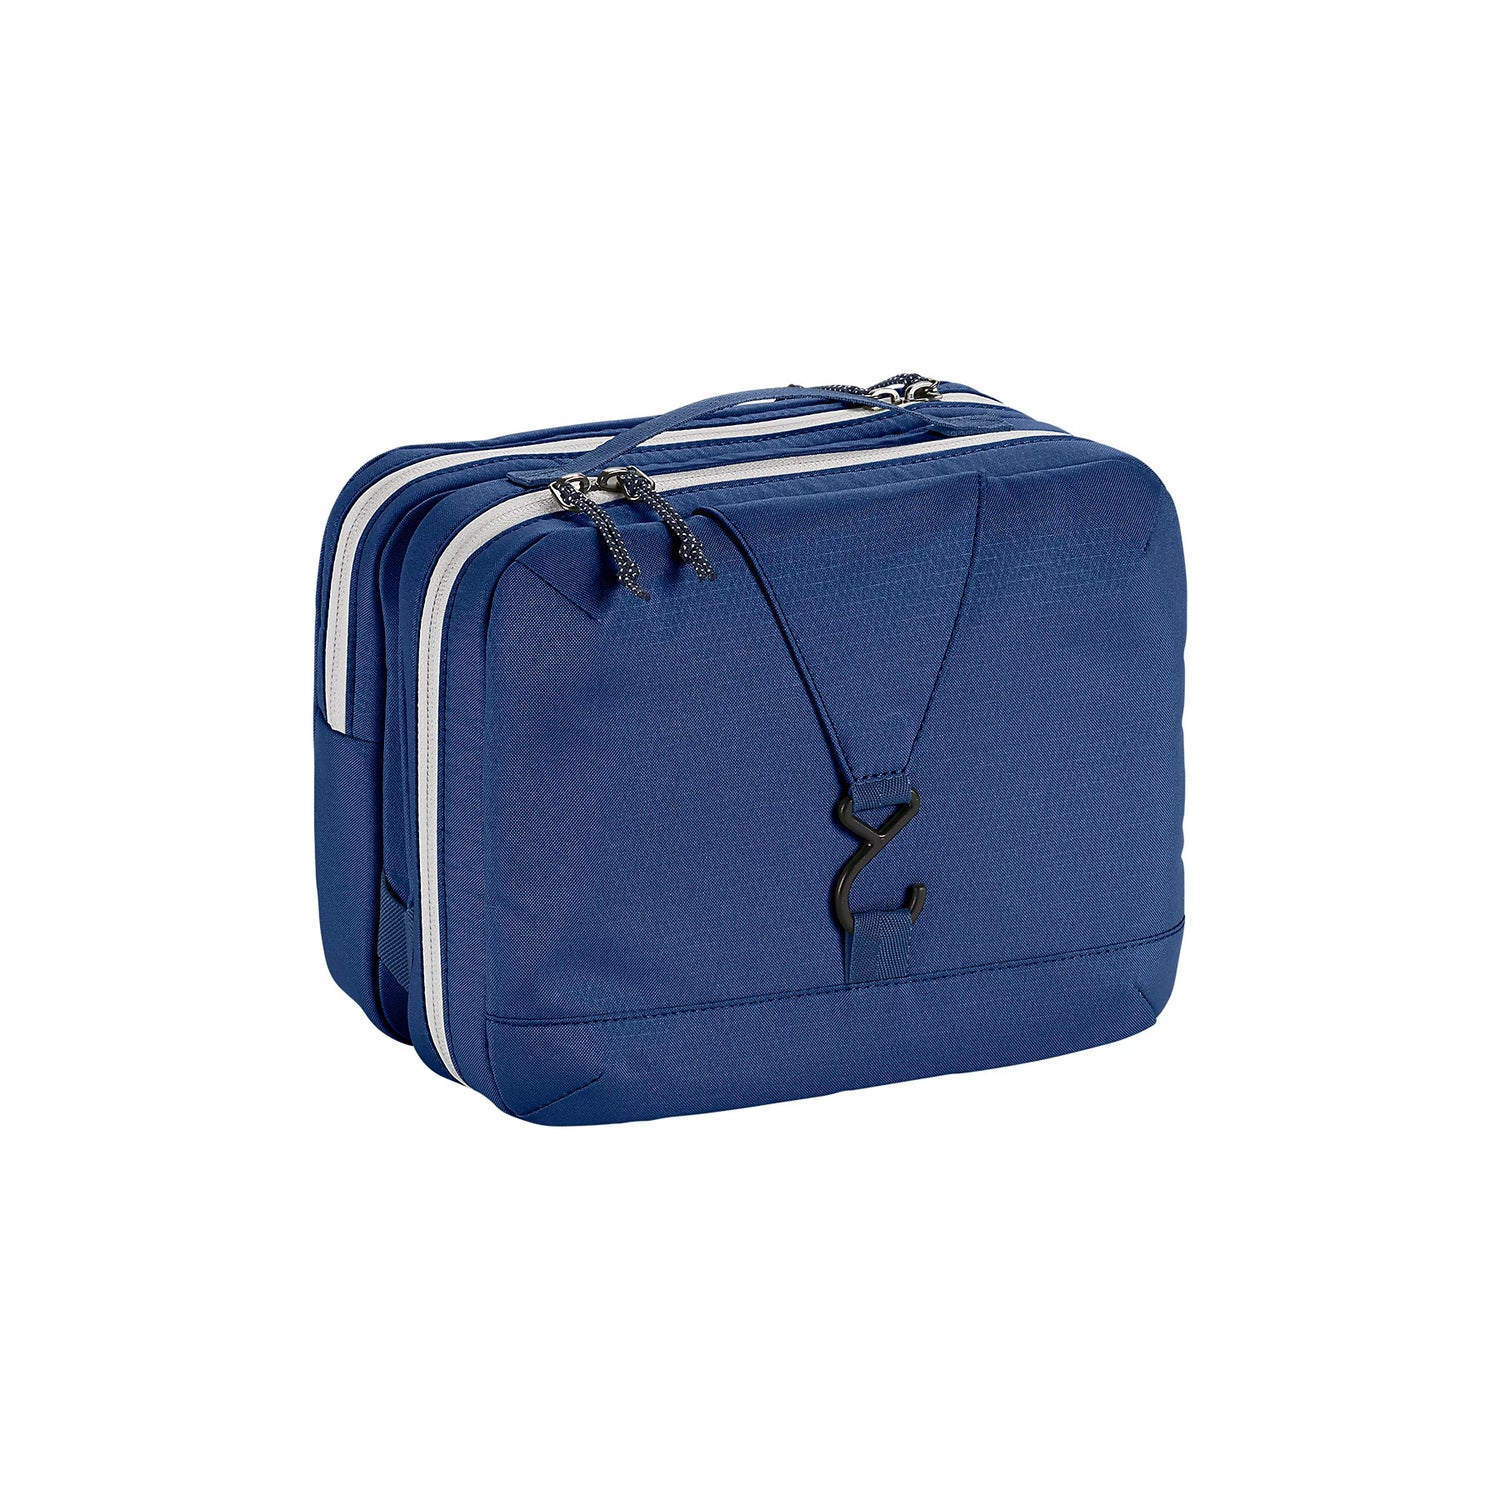 PACK-IT™ Reveal Trifold Toiletry Kit - AIZOME BLUE/GREY